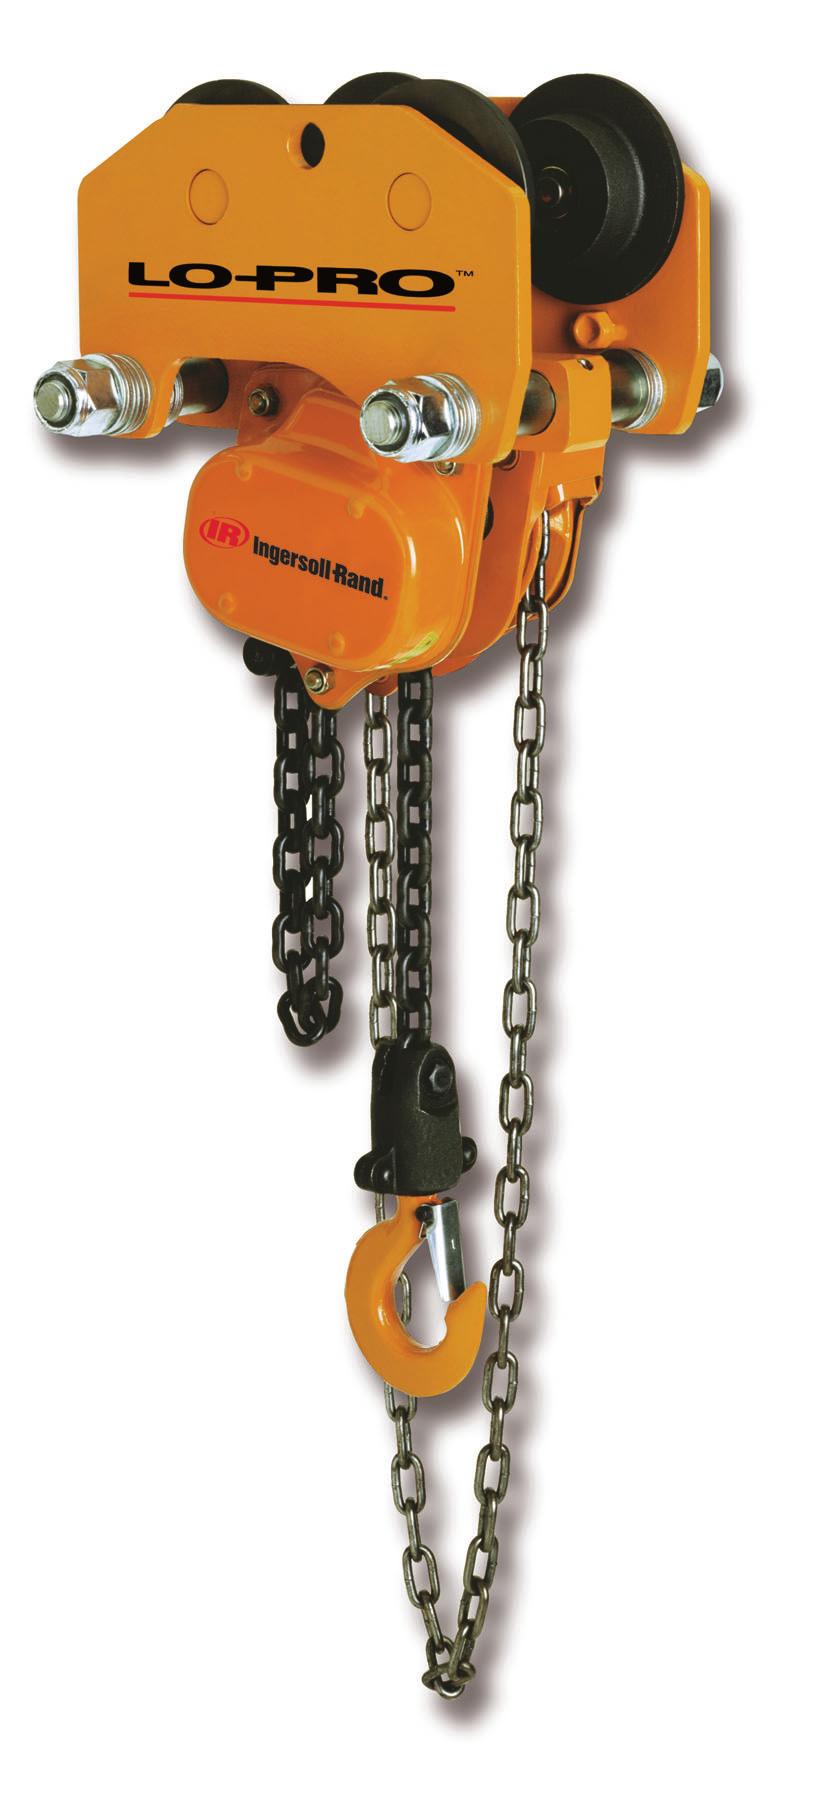 THV Lo-Pro Series Manual Chain Hoist 1/2 10 metric ton Lifting Capacity Low headroom rmy Style type trolley hoist Utilizes our premium VL2 hoist with a low profile trolley.